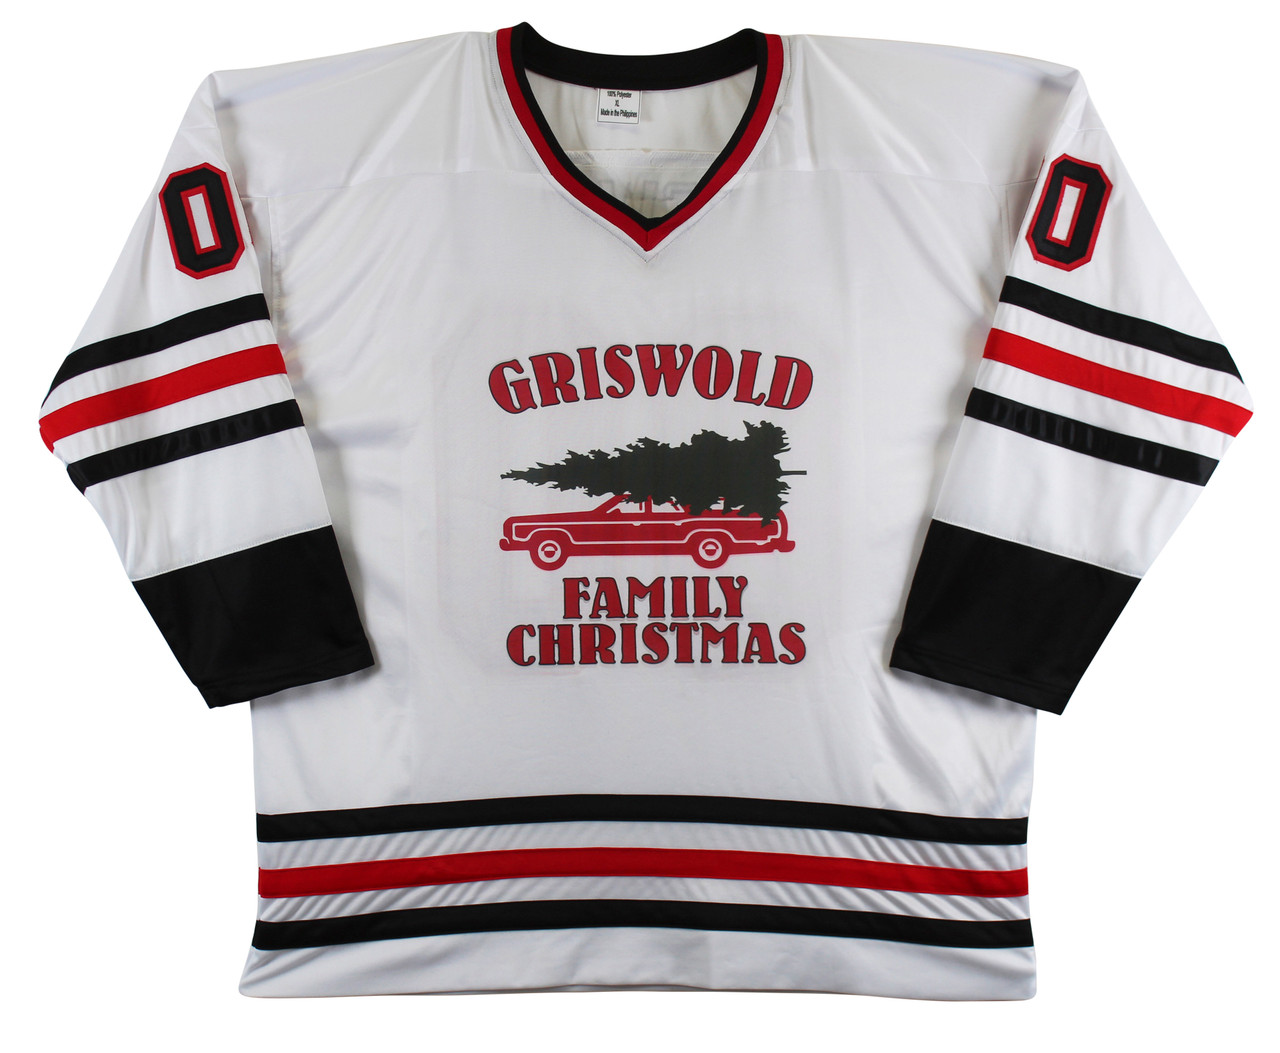 Chevy Chase Signed Autographed Clark Griswold Chicago Blackhawks